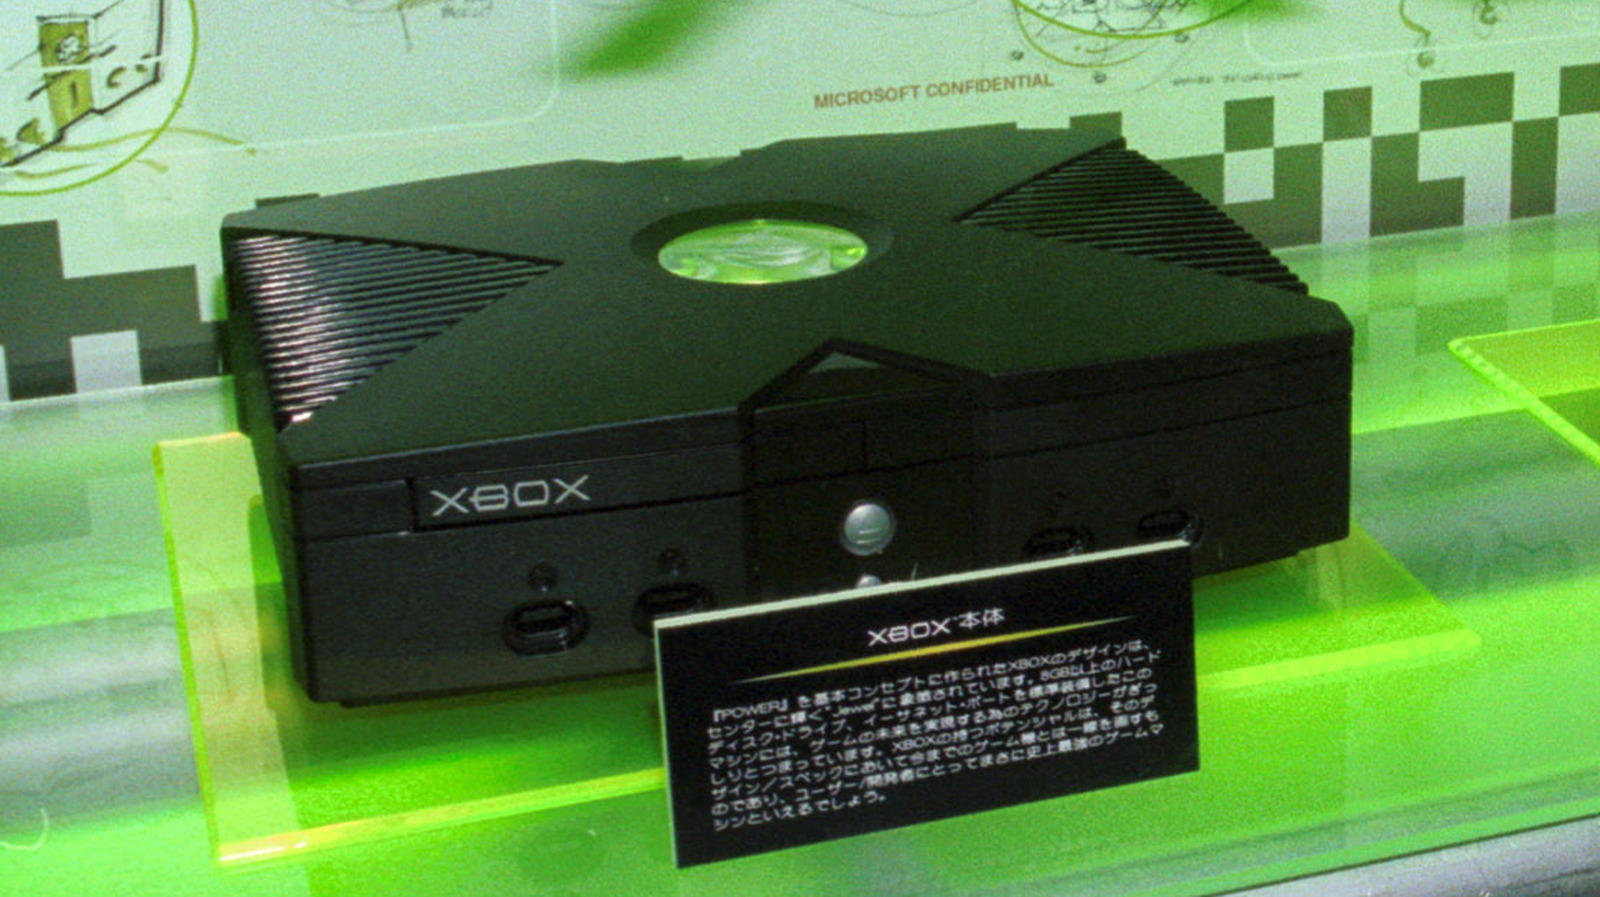 The original Xbox was underrated. Here's why - Looper